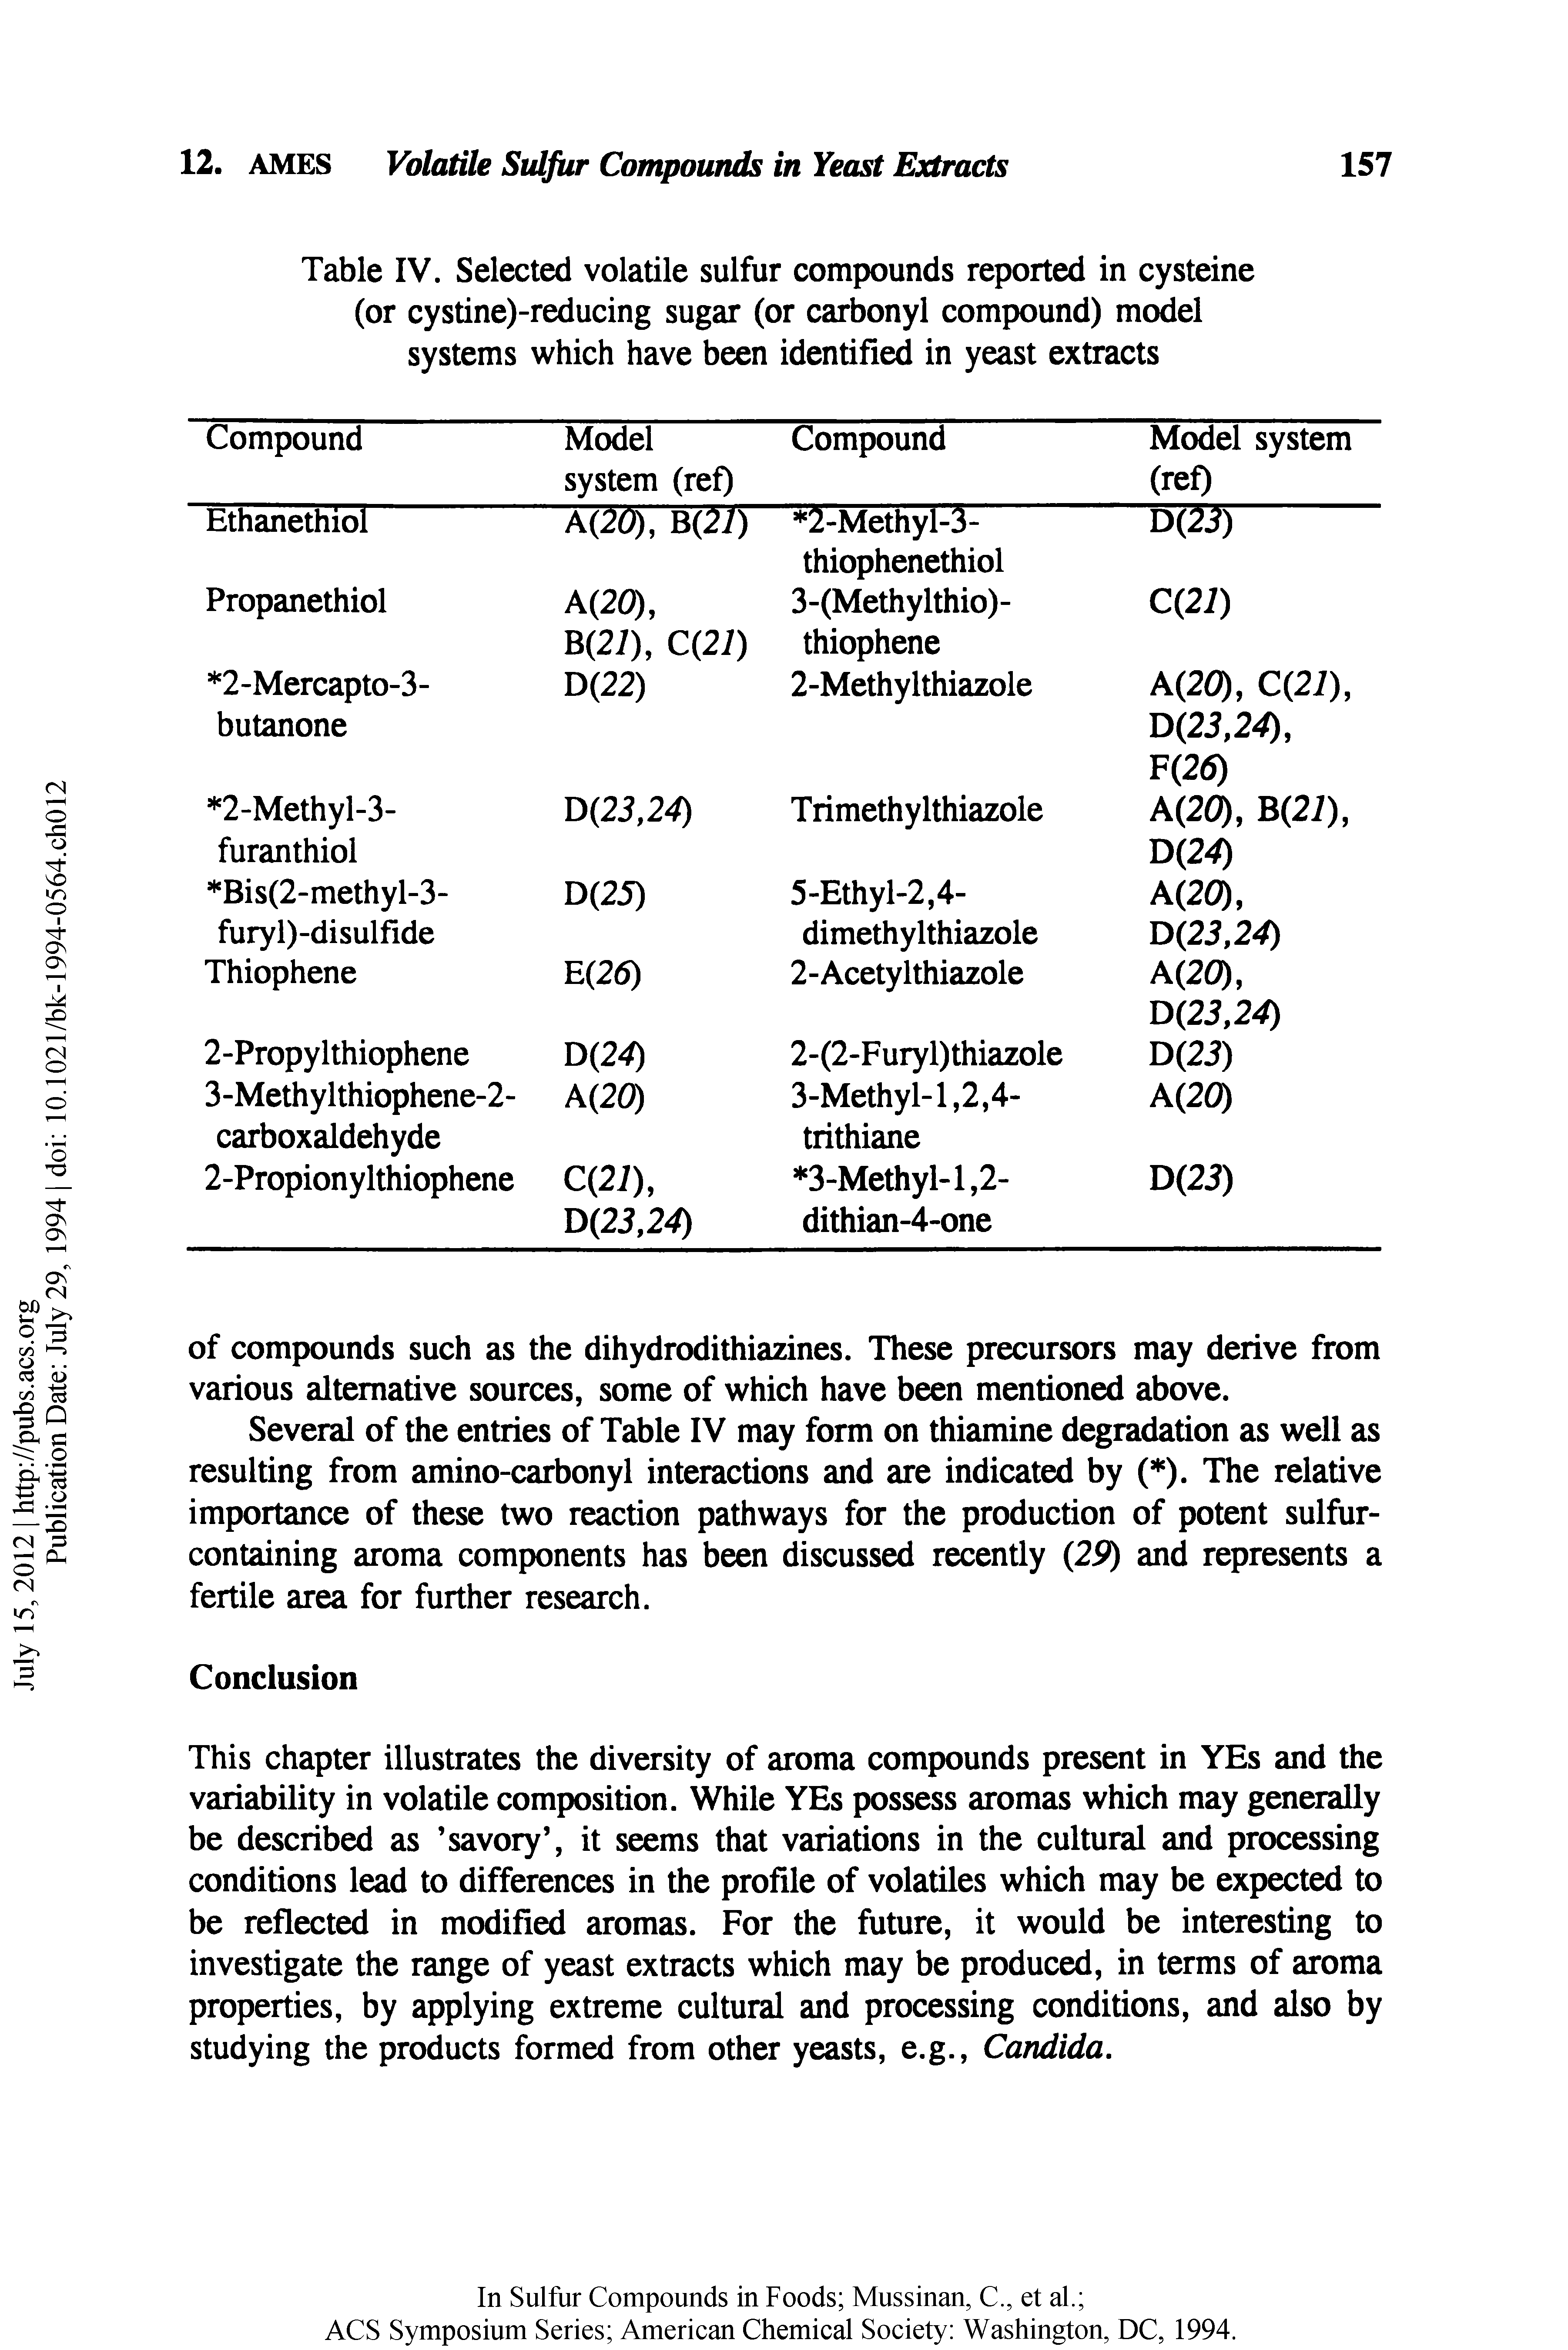 Table IV. Selected volatile sulfur compounds reported in cysteine (or cystine)-reducing sugar (or carbonyl compound) model systems which have been identified in yeast extracts...